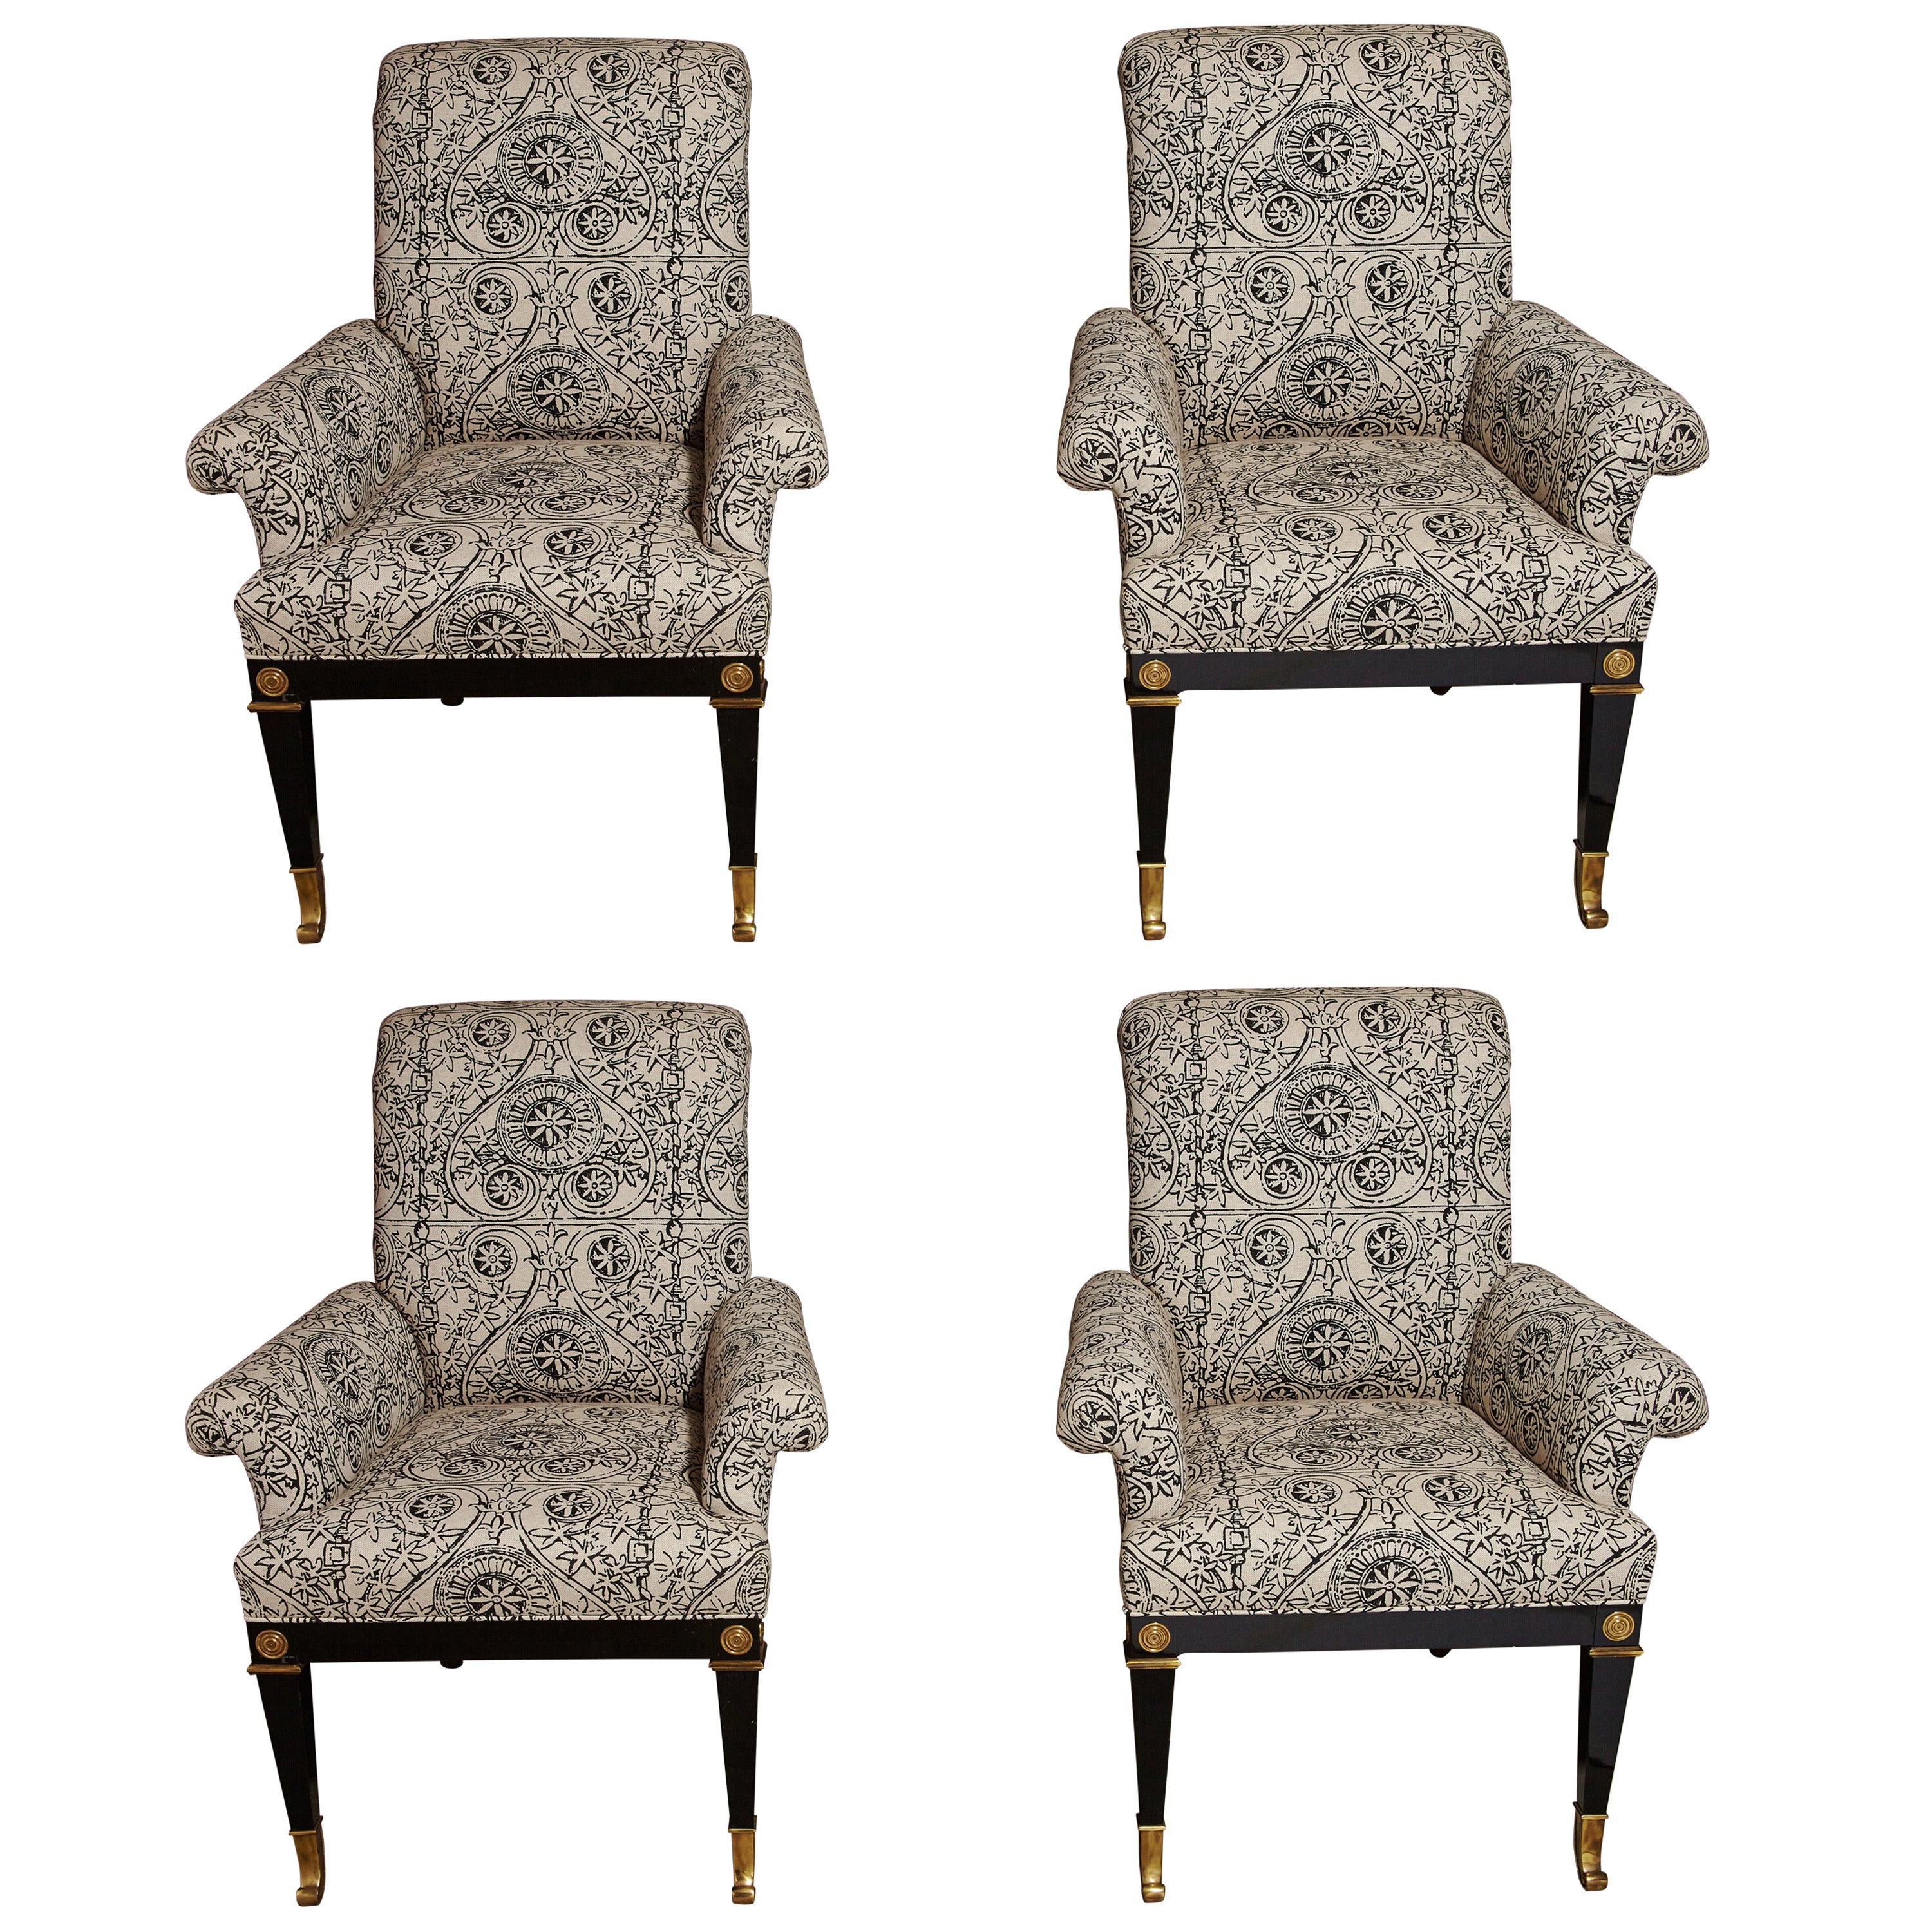 Set of Four Black Lacquer and Brass-Mounted Mastercraft Armchairs